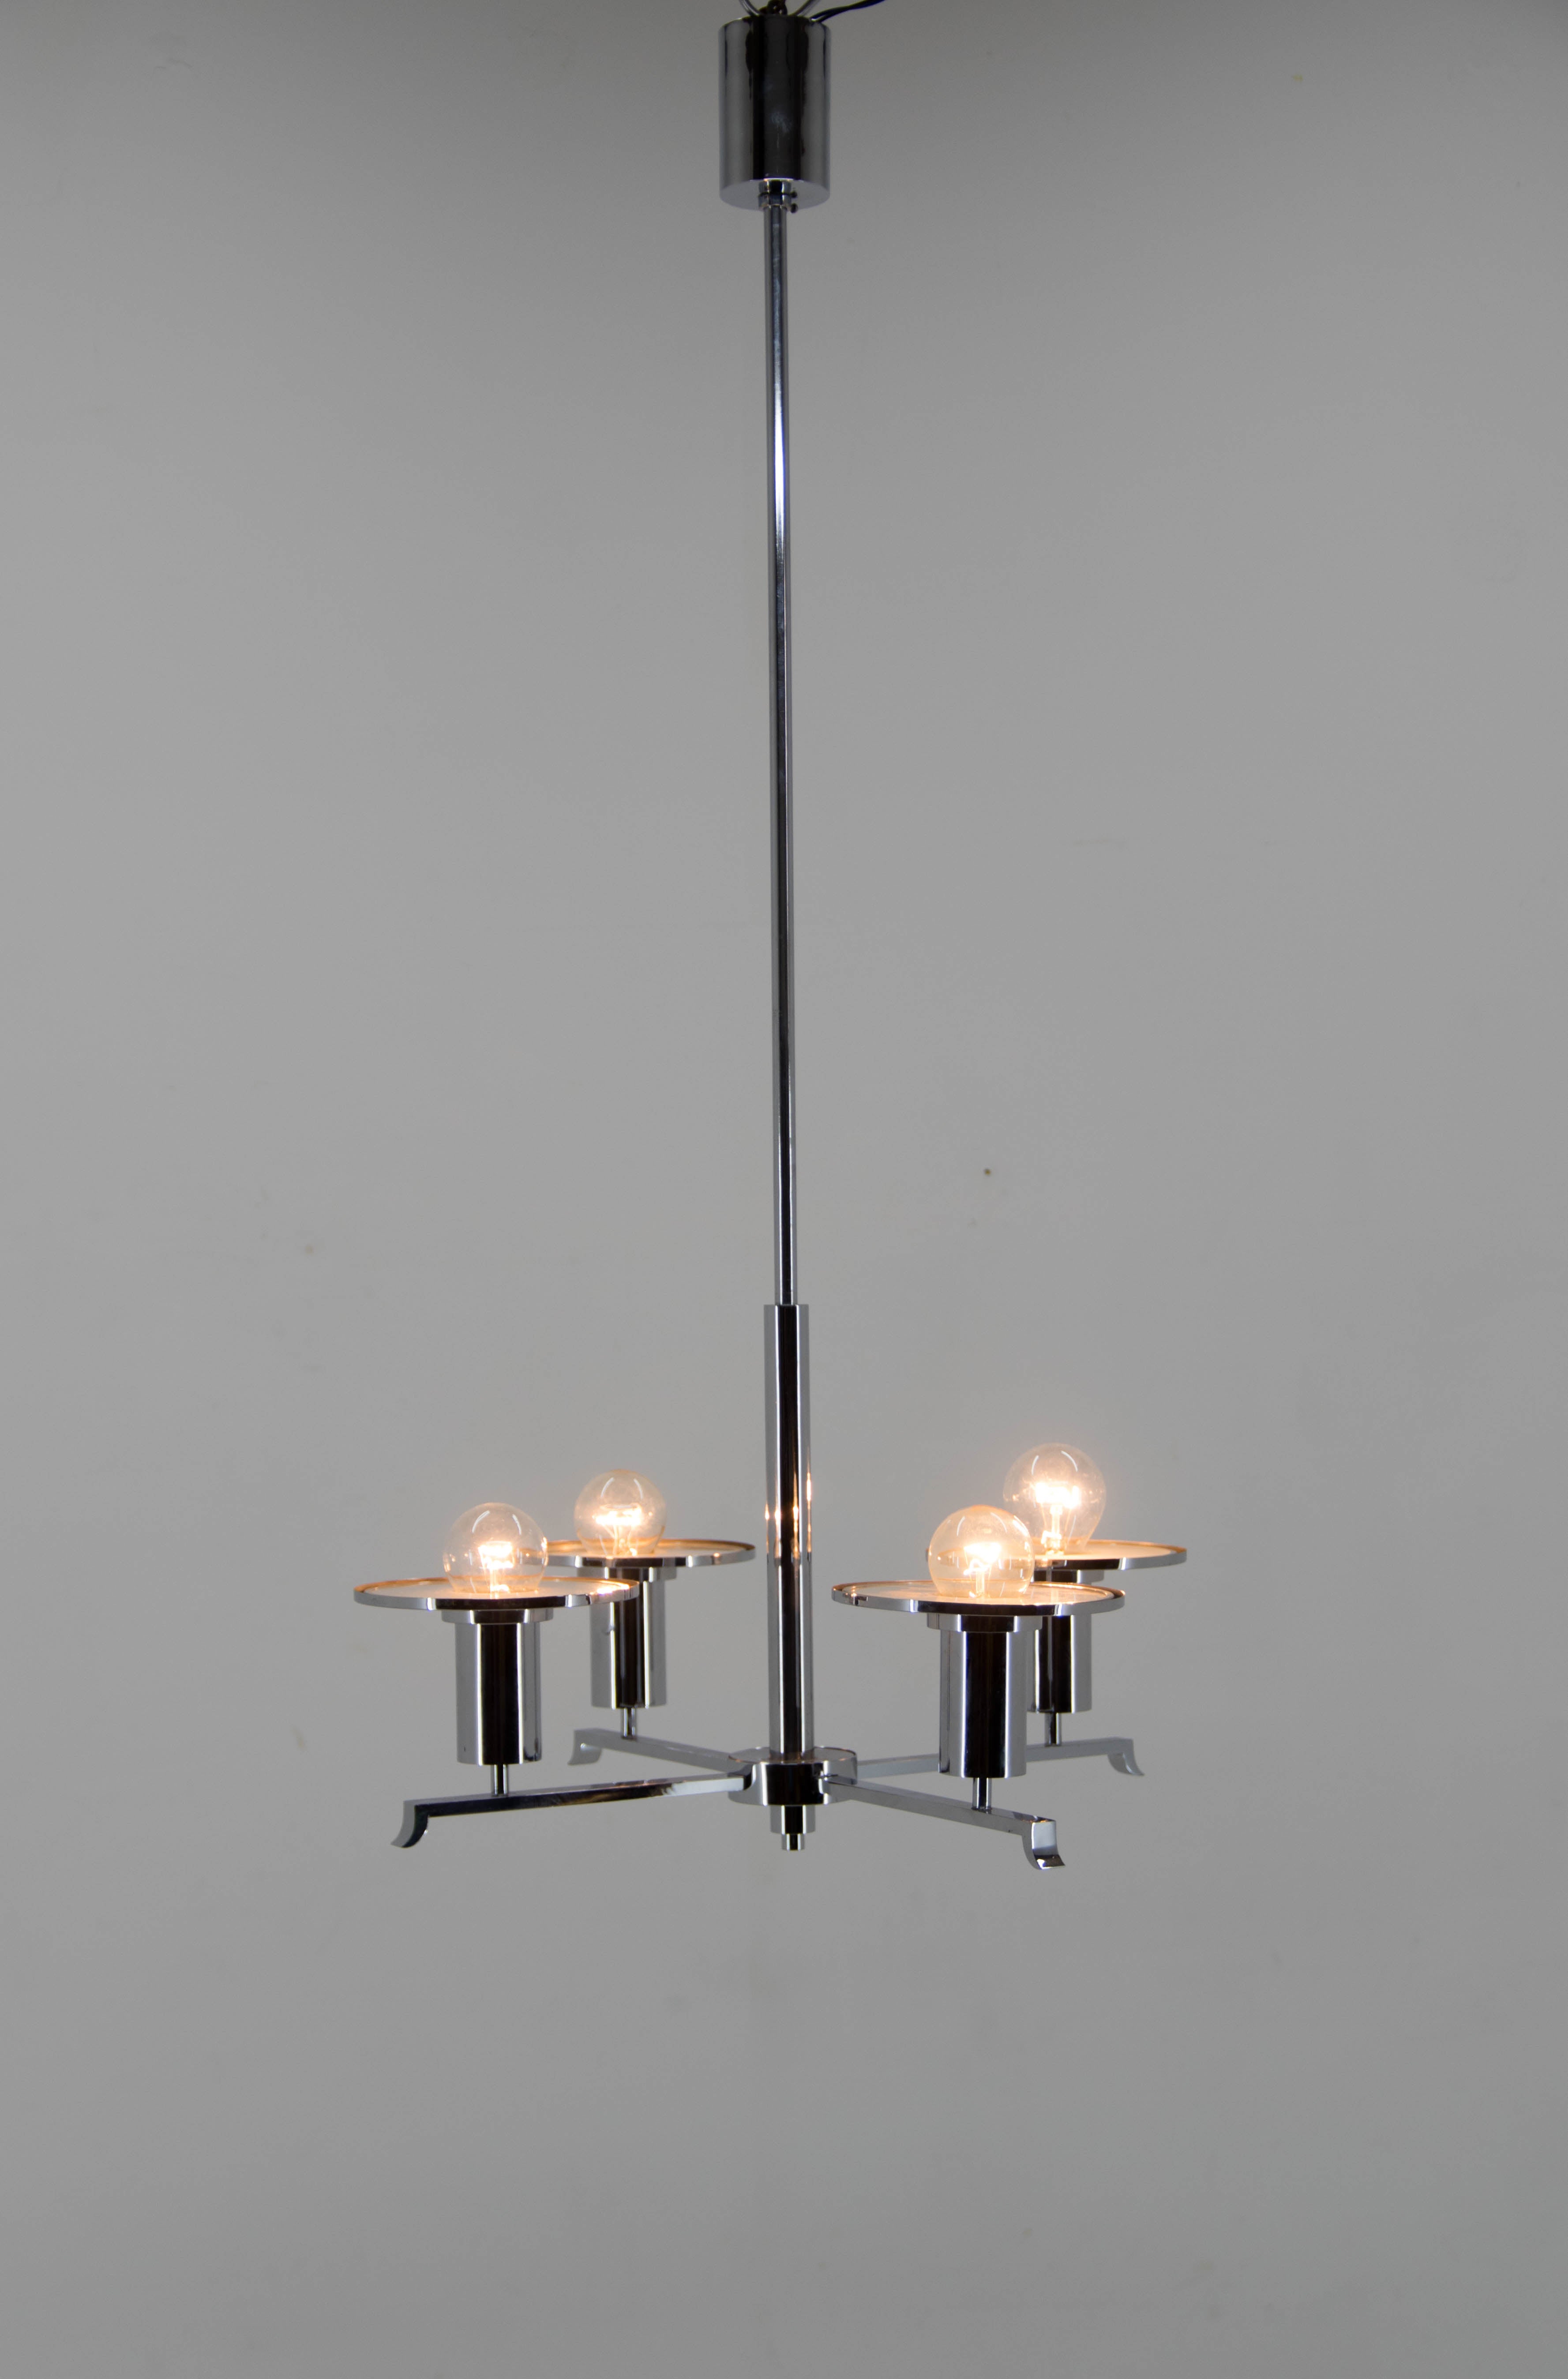 Beautiful minimalist Functionalist 4-flamming chandelier. Very good original condition. Chrome in perfect condition - polished. One glass shade has minor spot on sandblasting shown on photo.
Rewired: 4X60W, EE25-E27 bulbs
US wiring compatible.